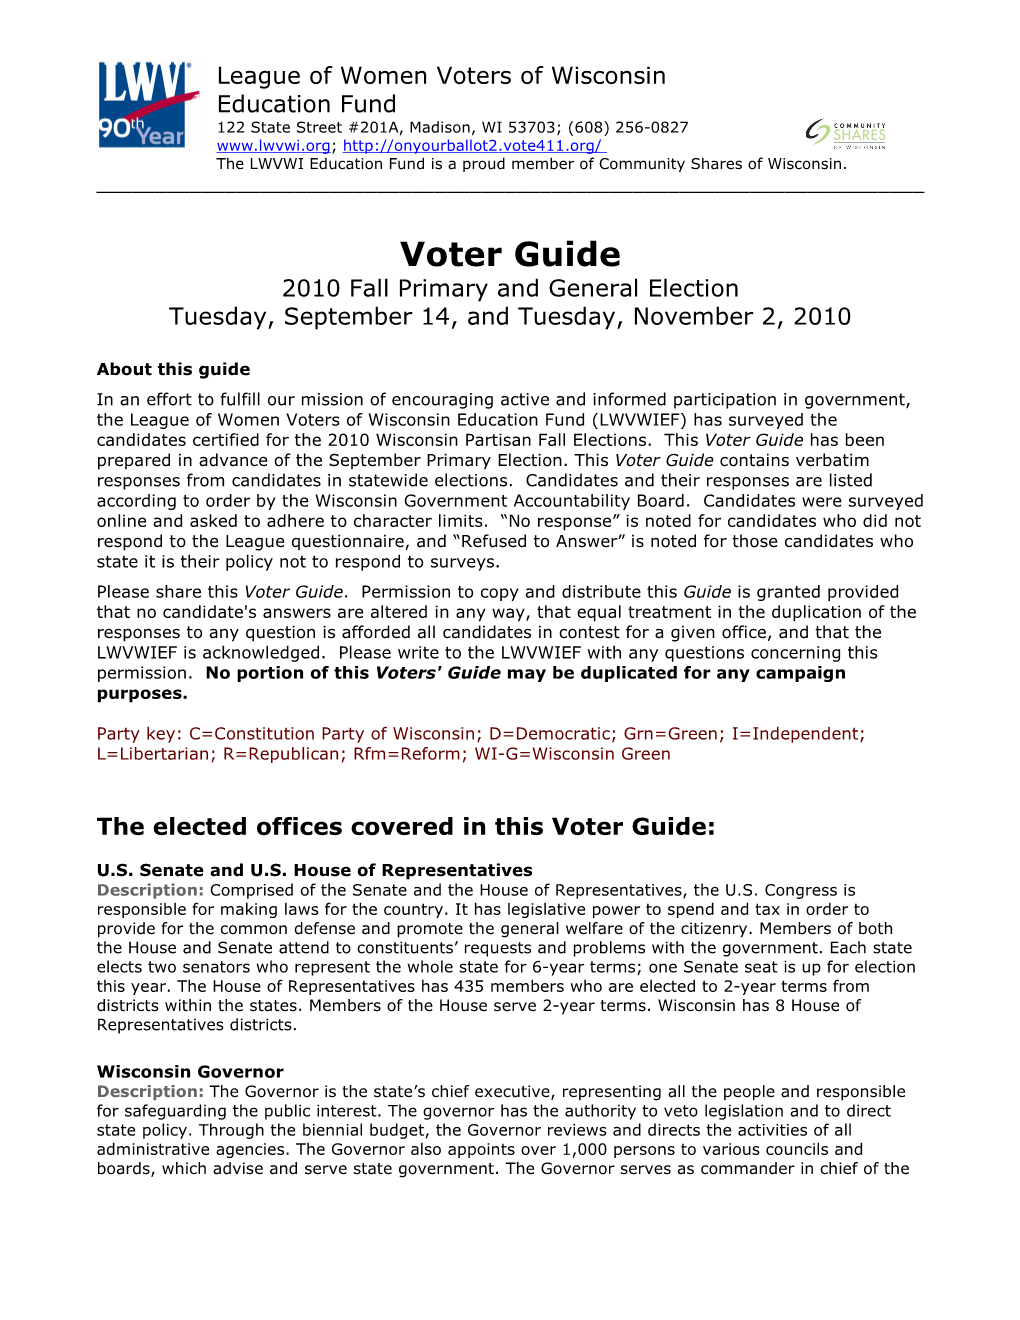 Voter Guide 2010 Fall Primary and General Election Tuesday, September 14, and Tuesday, November 2, 2010